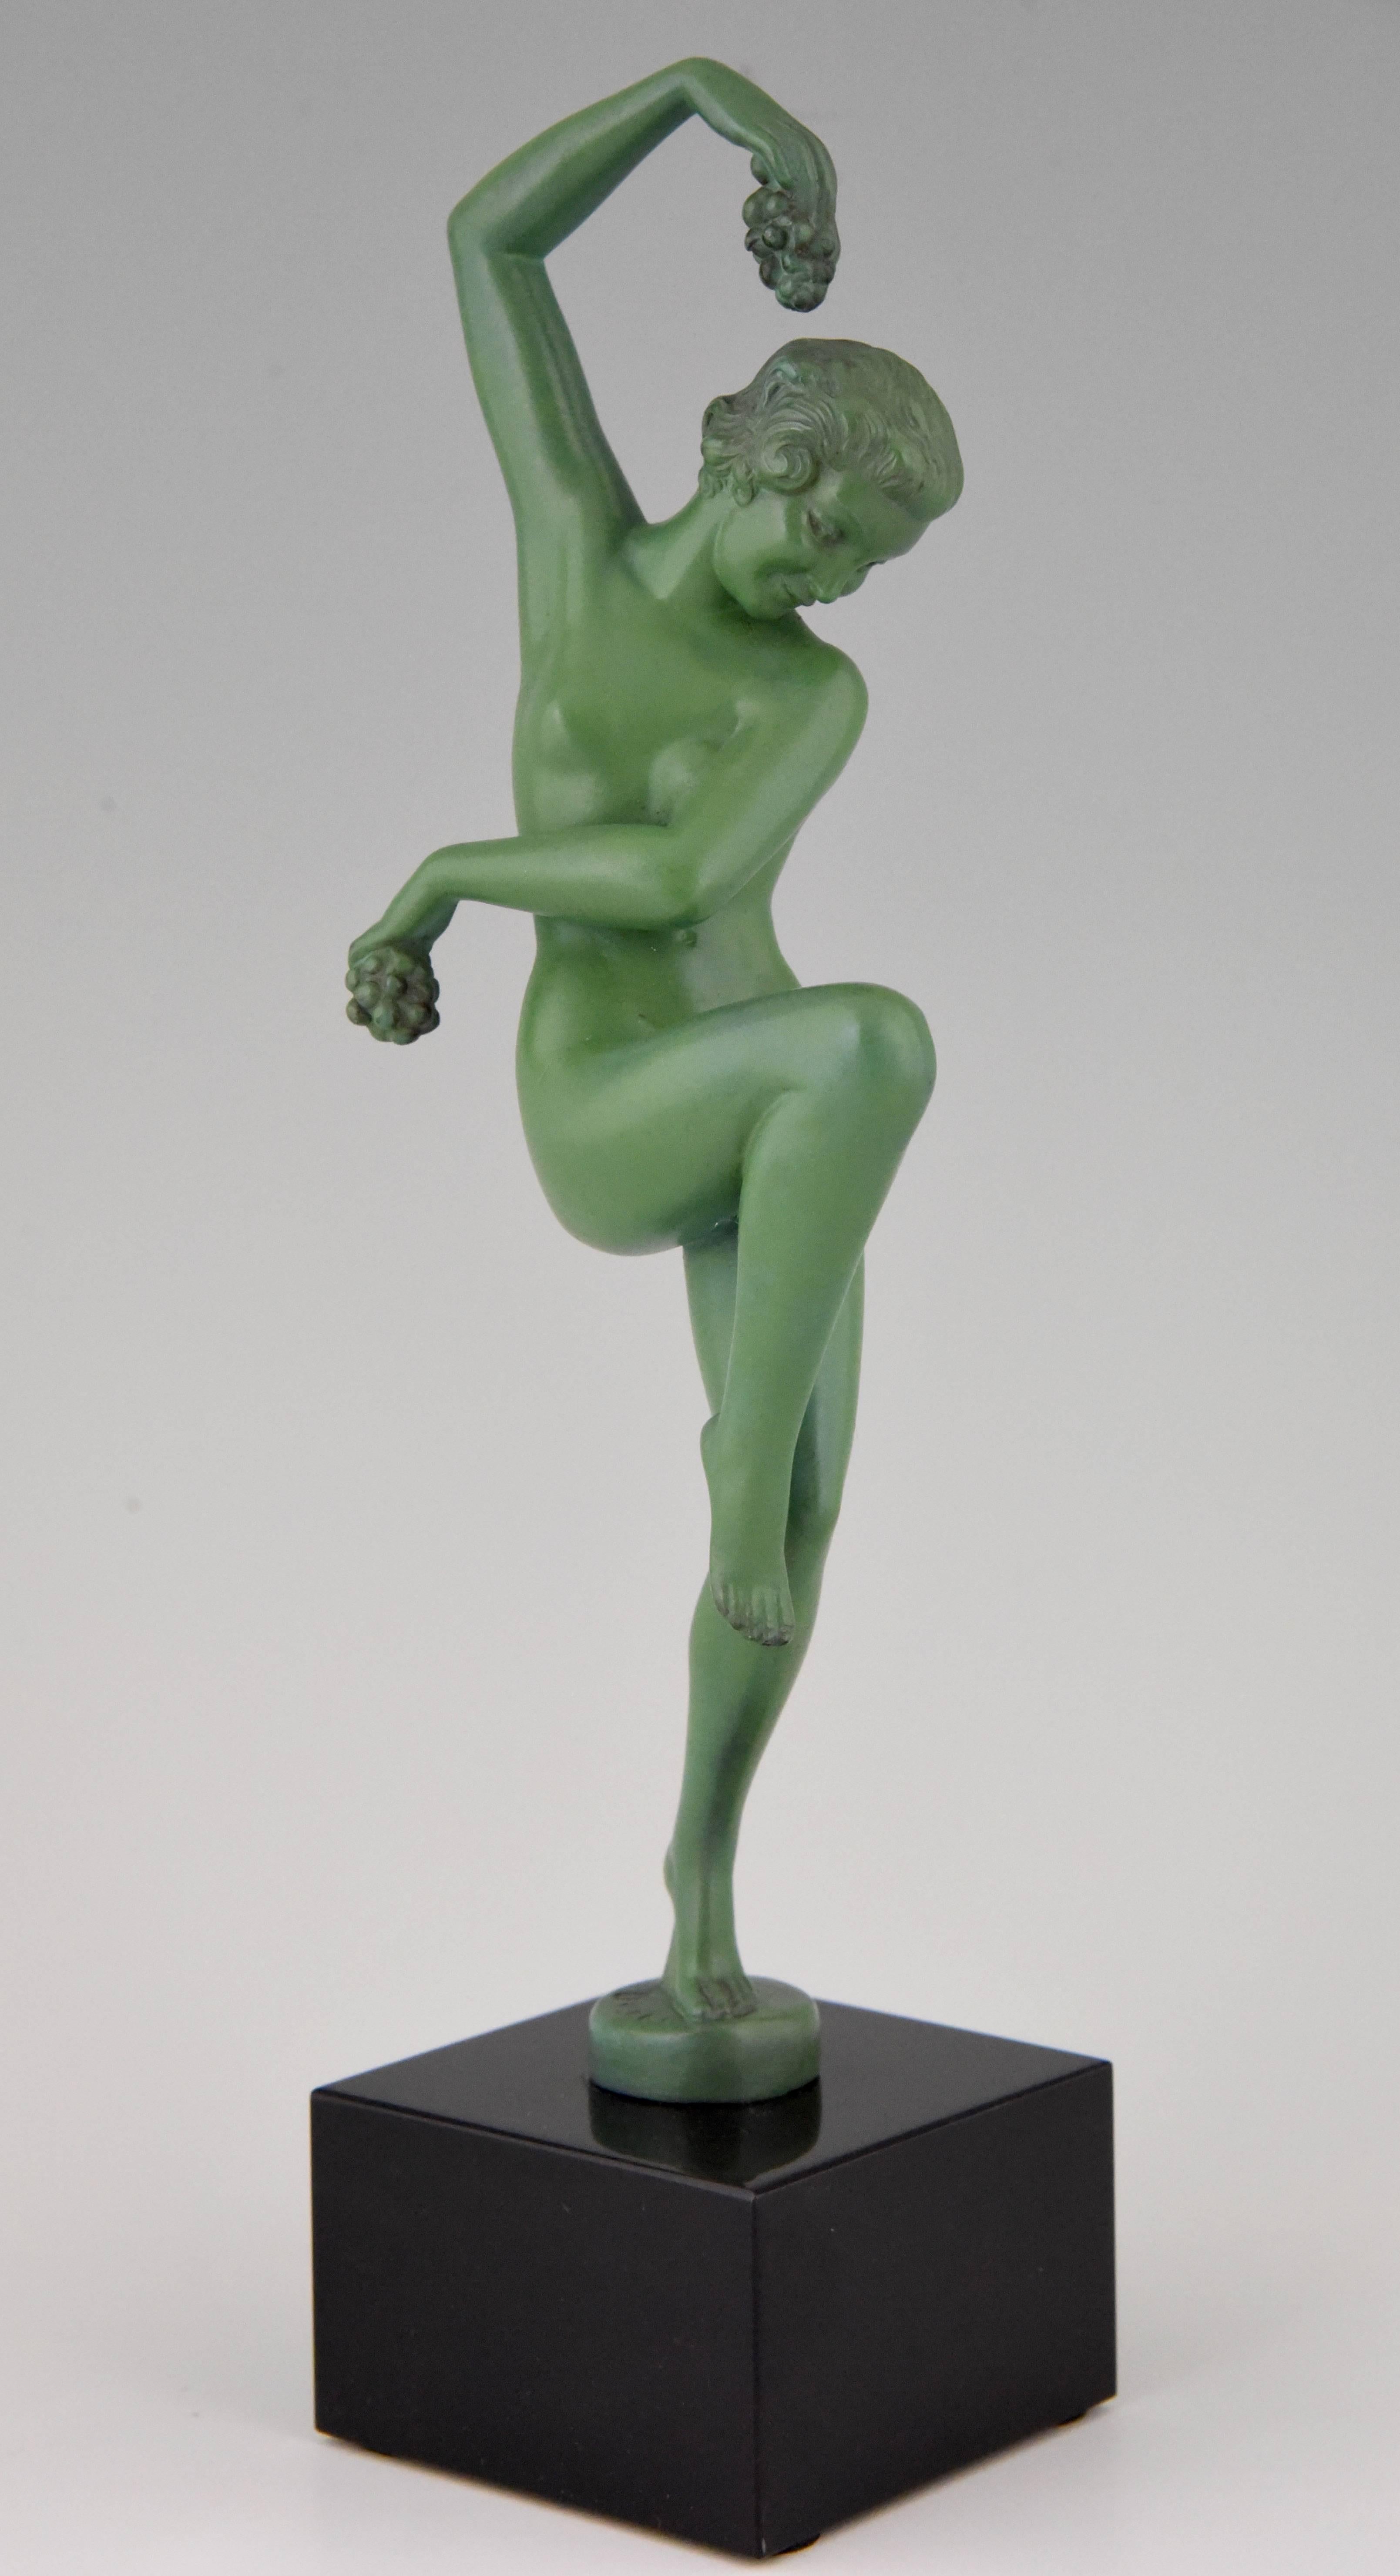 French Art Deco Sculpture of a Nude Dancer with Grapes Denis, France, 1930